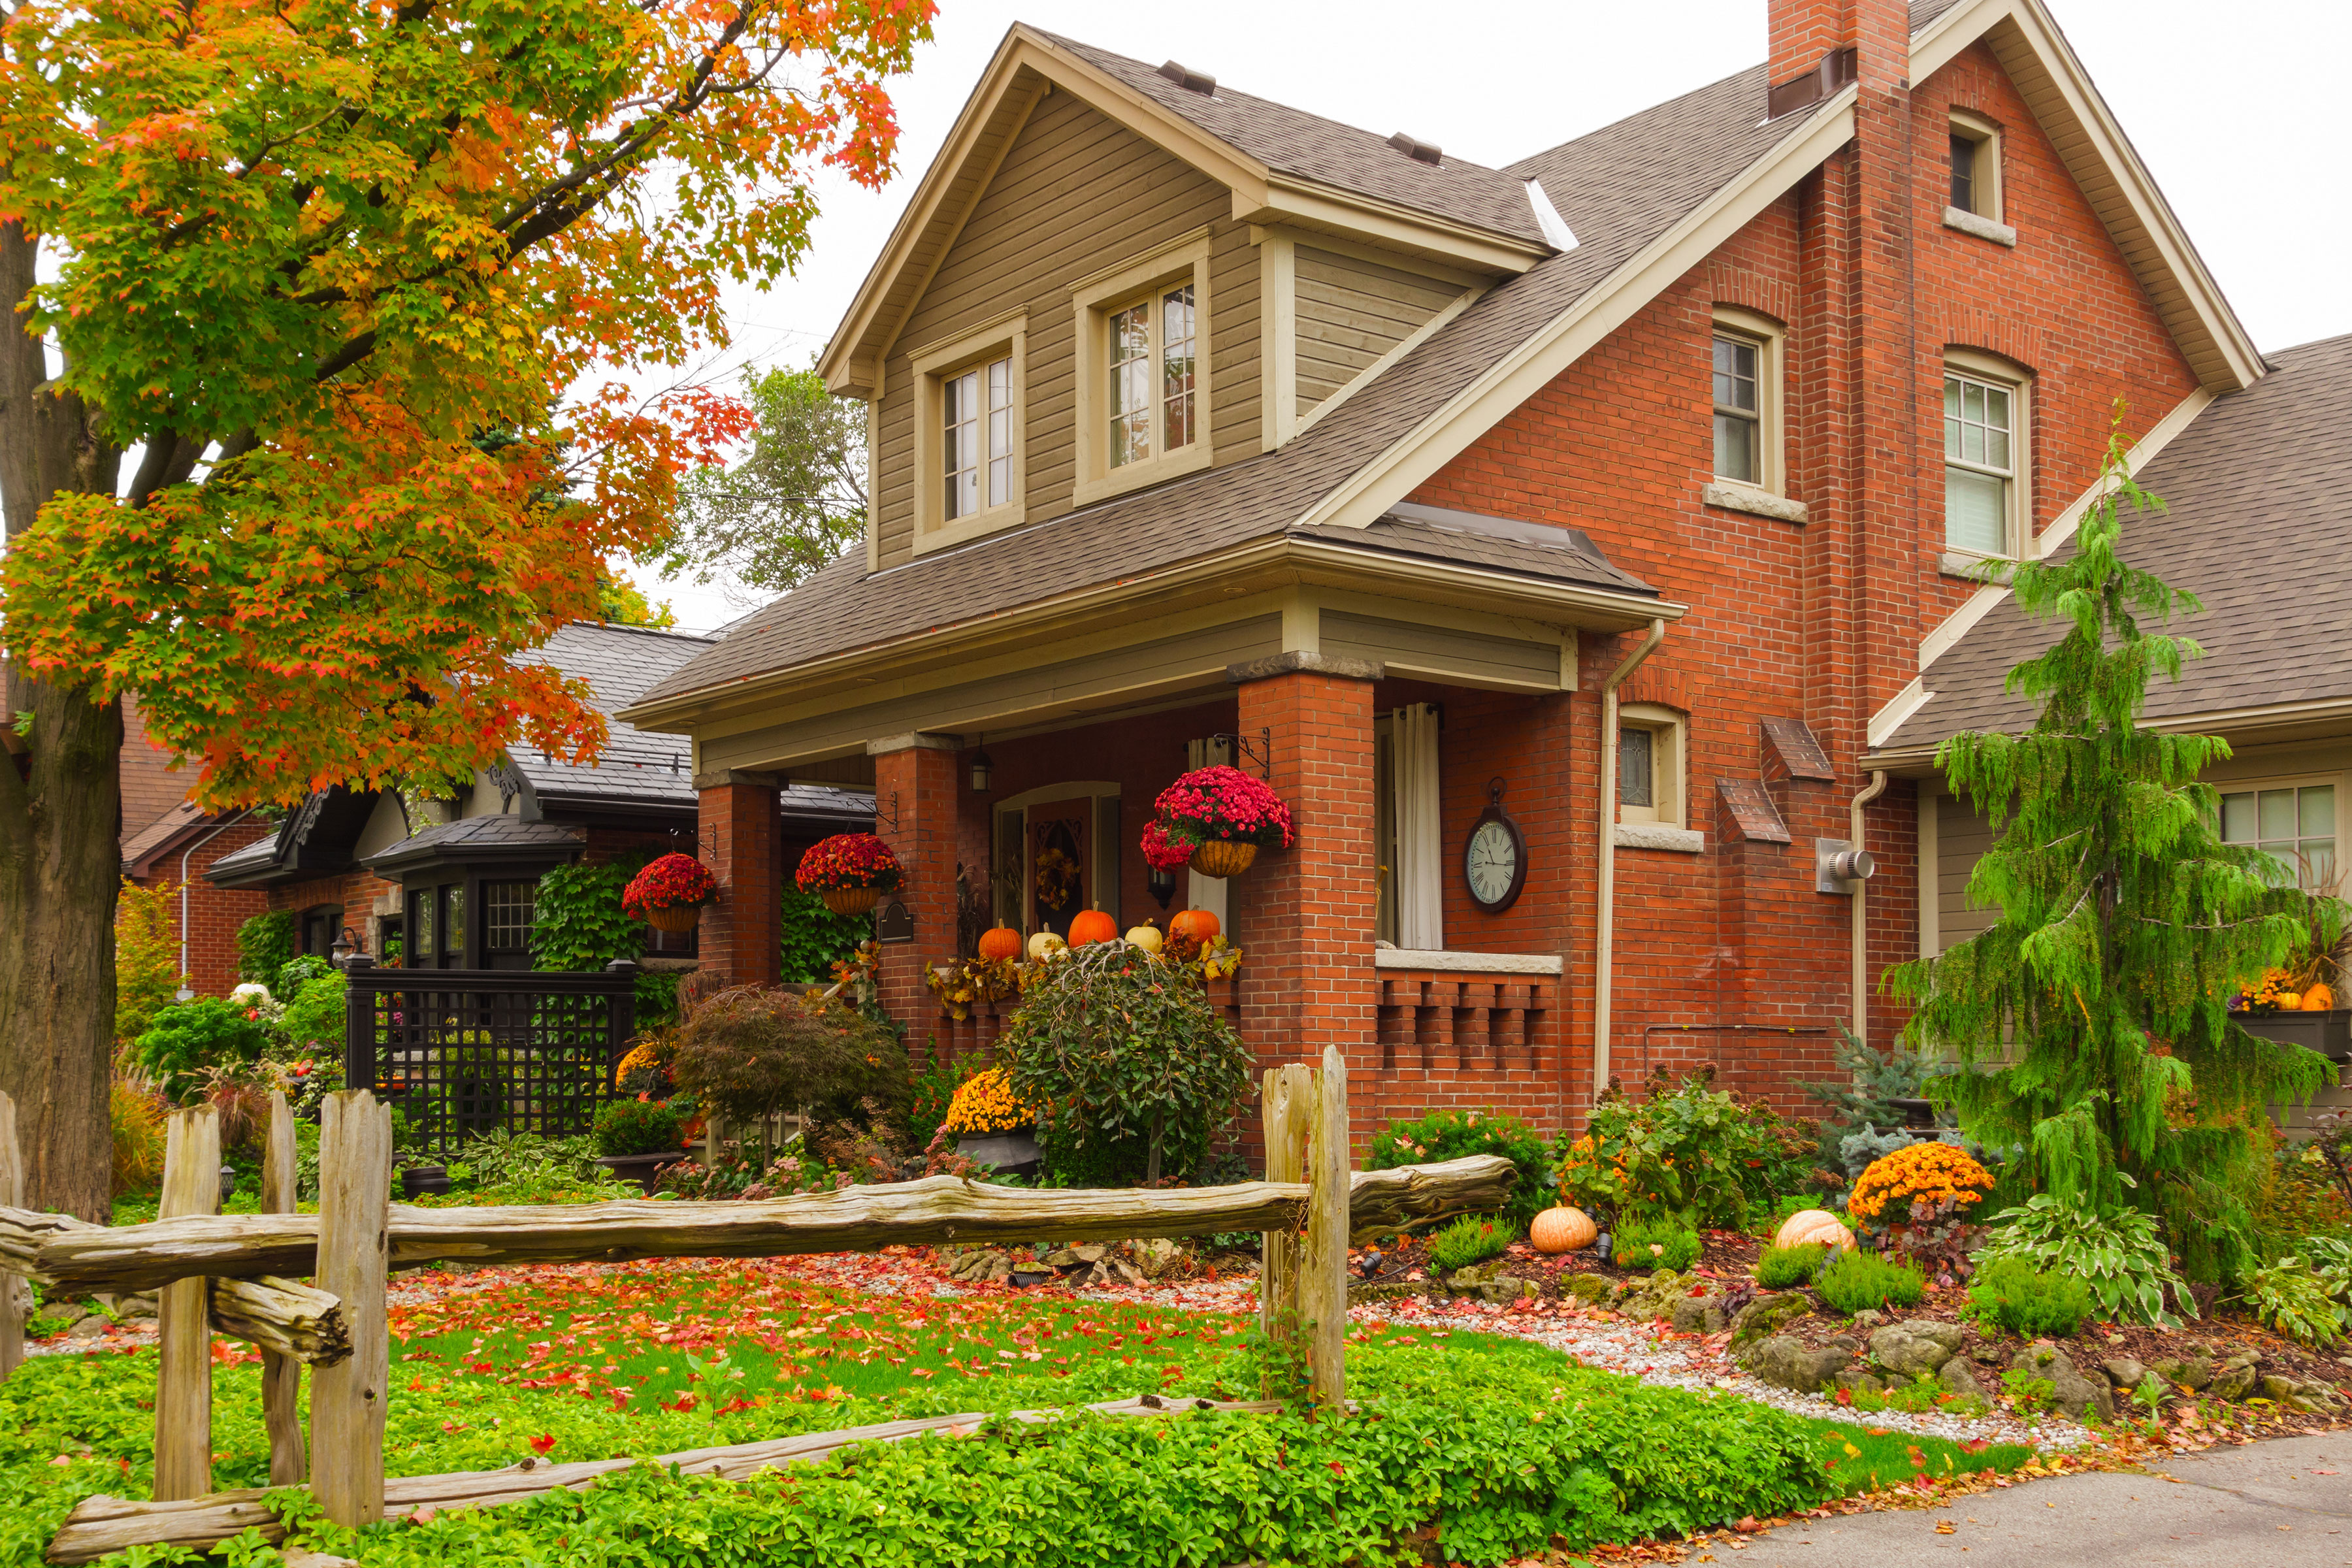 Home, Fall, Exterior, Old Home